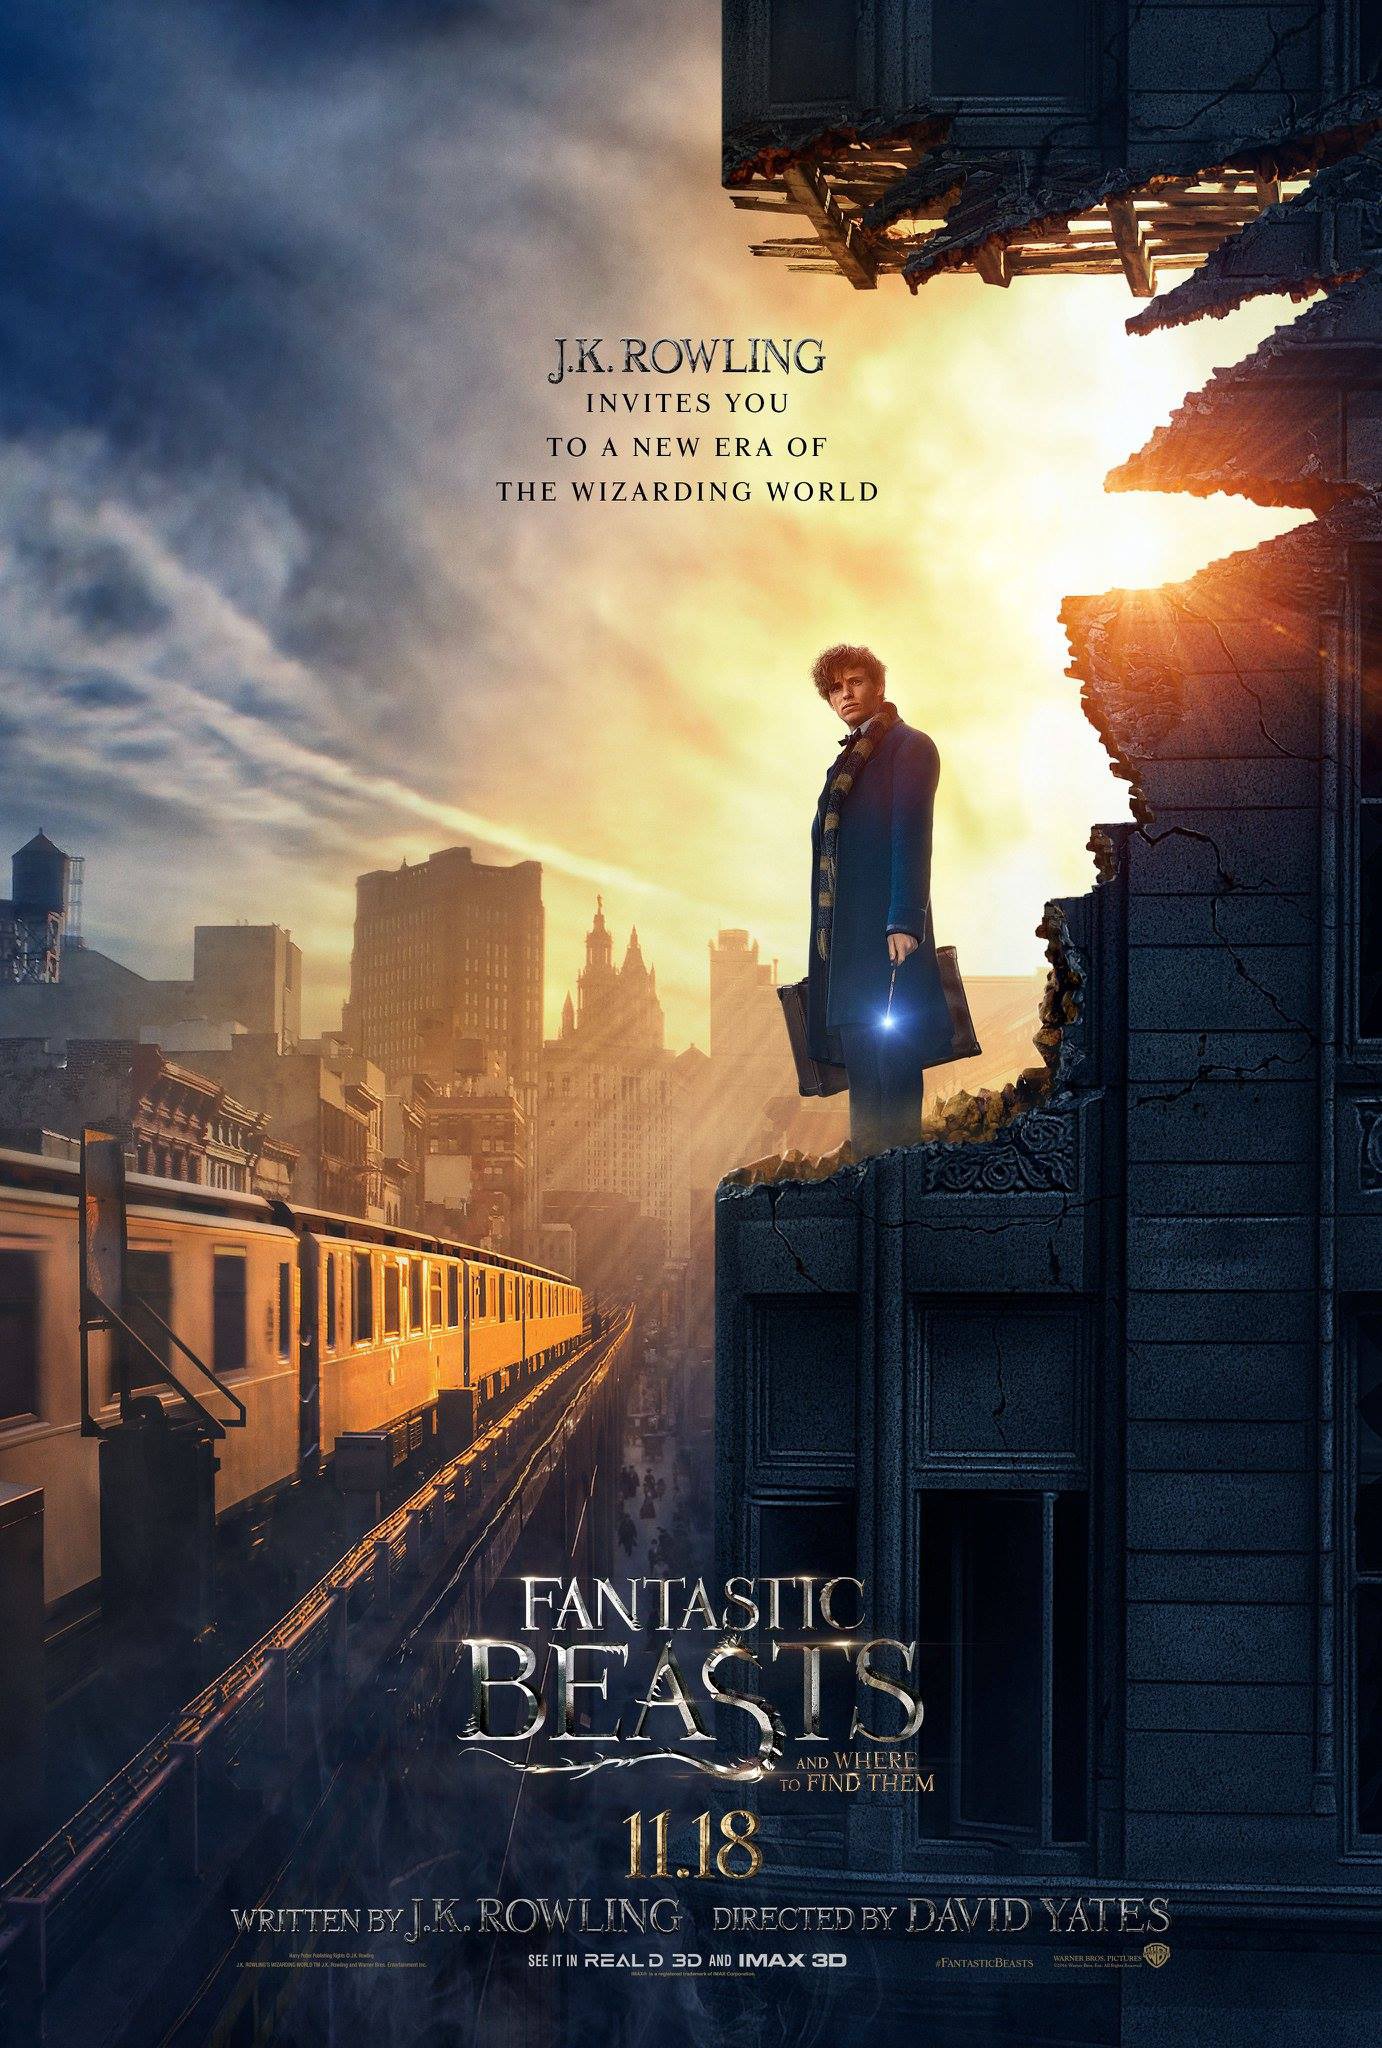      :   - Fantastic Beasts and Where to Find Them- Bonuces